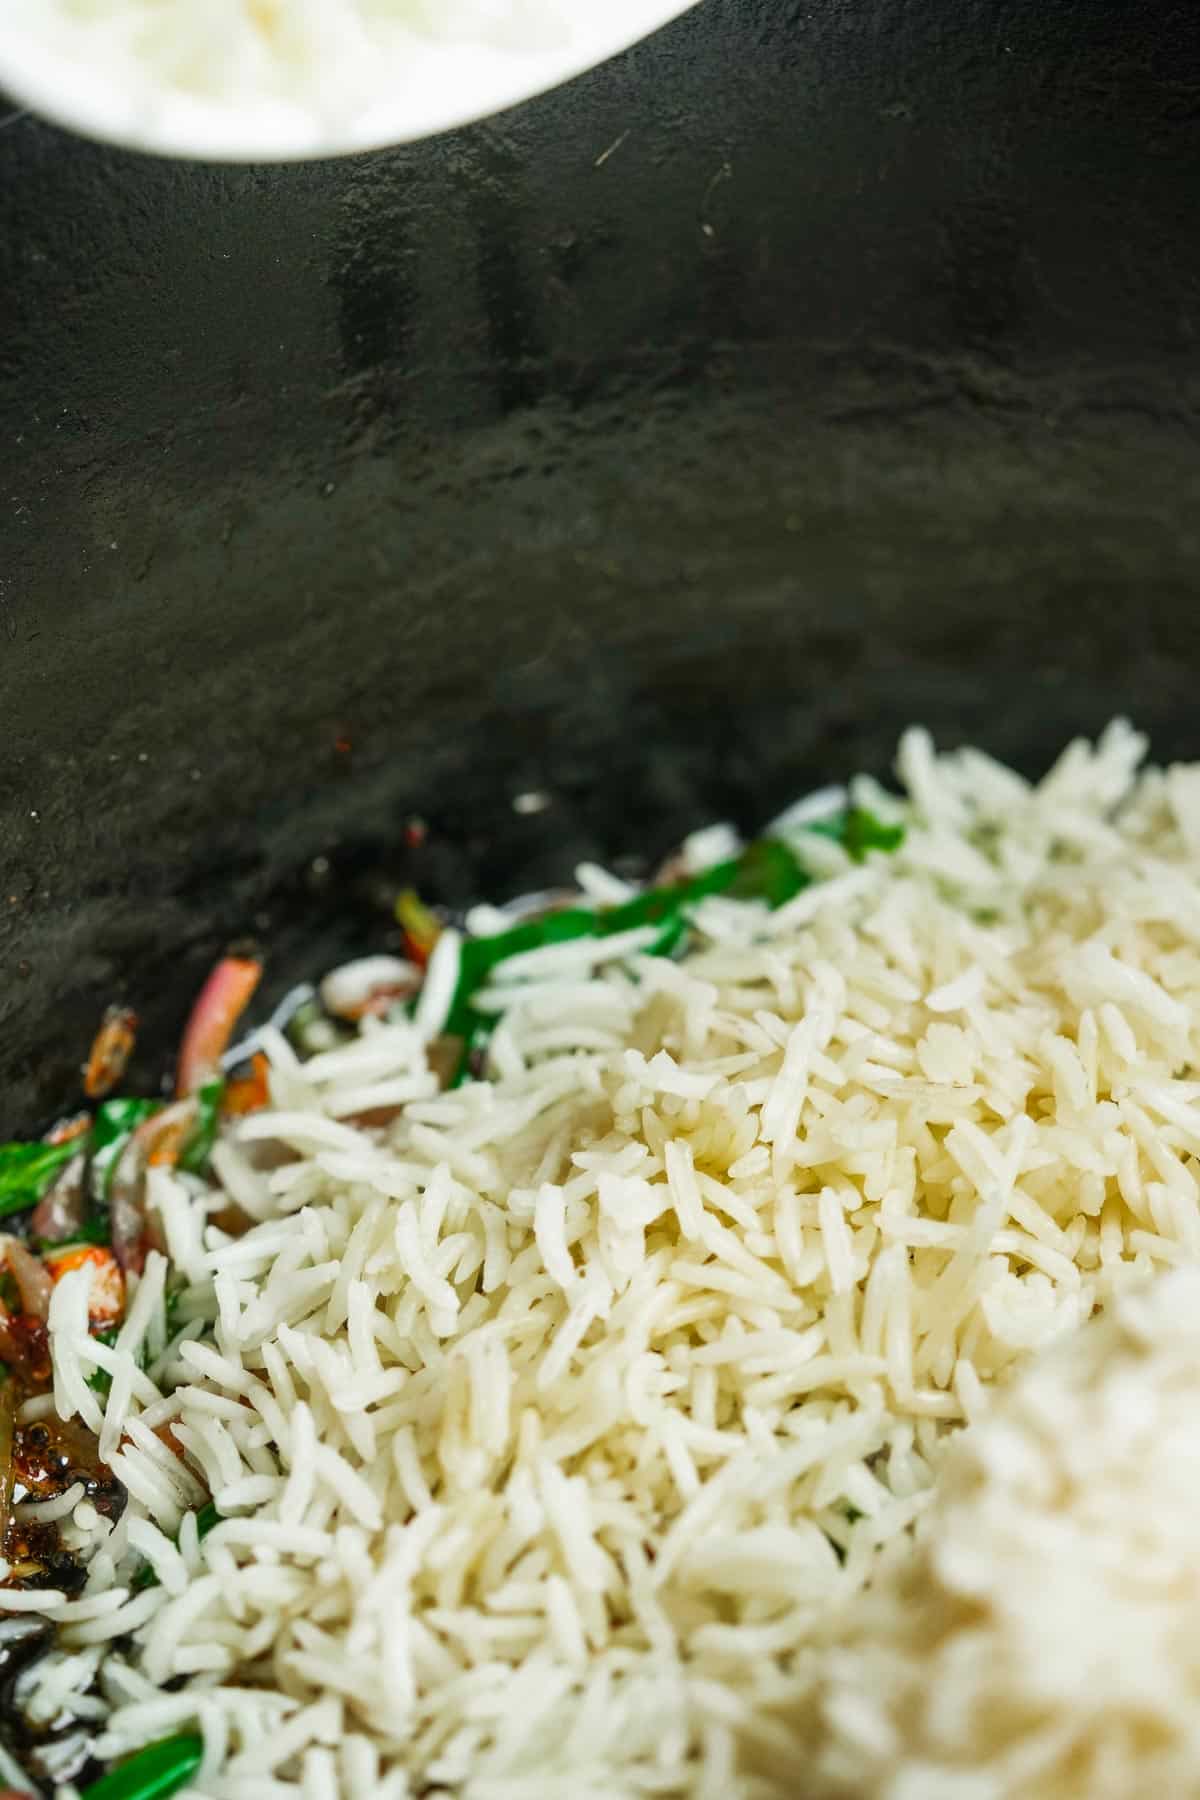 Rice is added to the stir-frying contents of the wok.